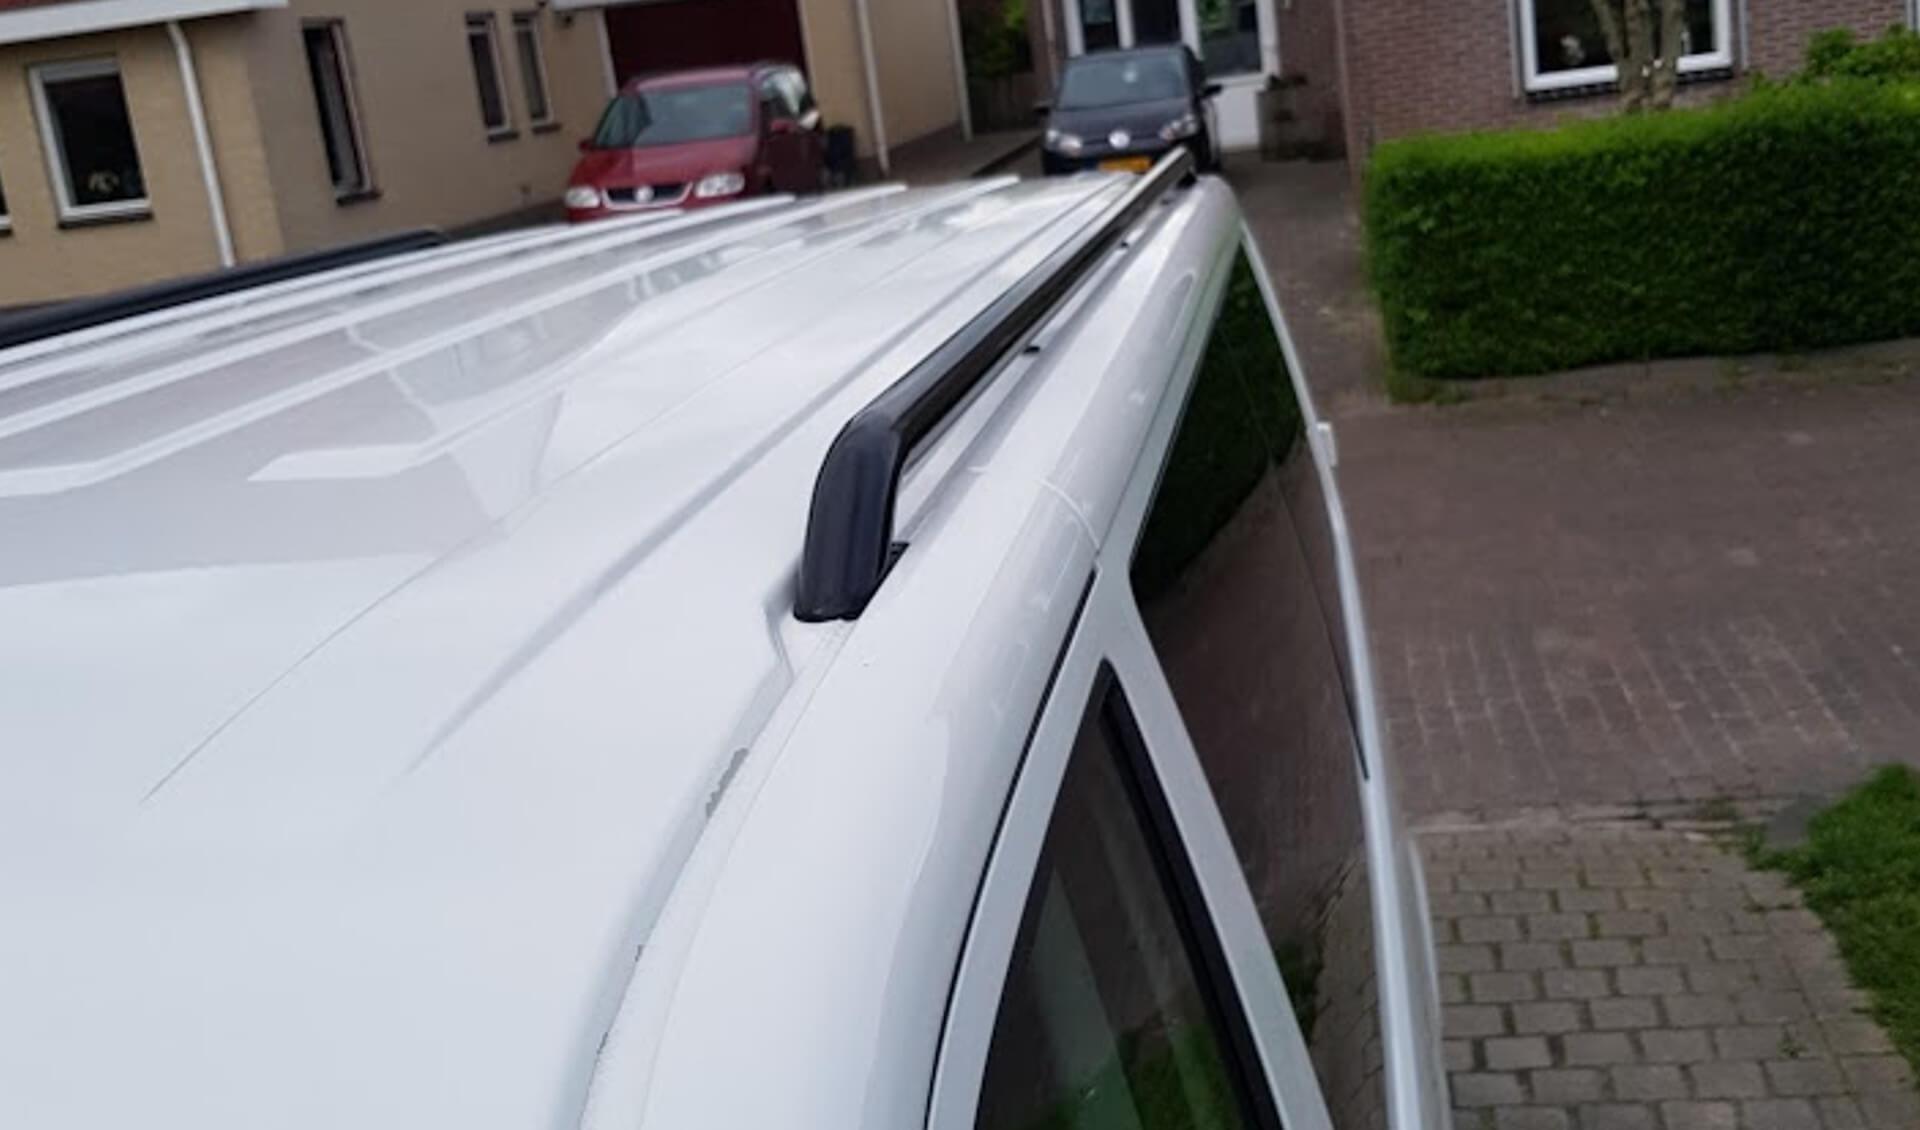 Black OE Style SUS201 Roof Rails for the Volkswagen Transporter T5 LWB -  - sold by Direct4x4